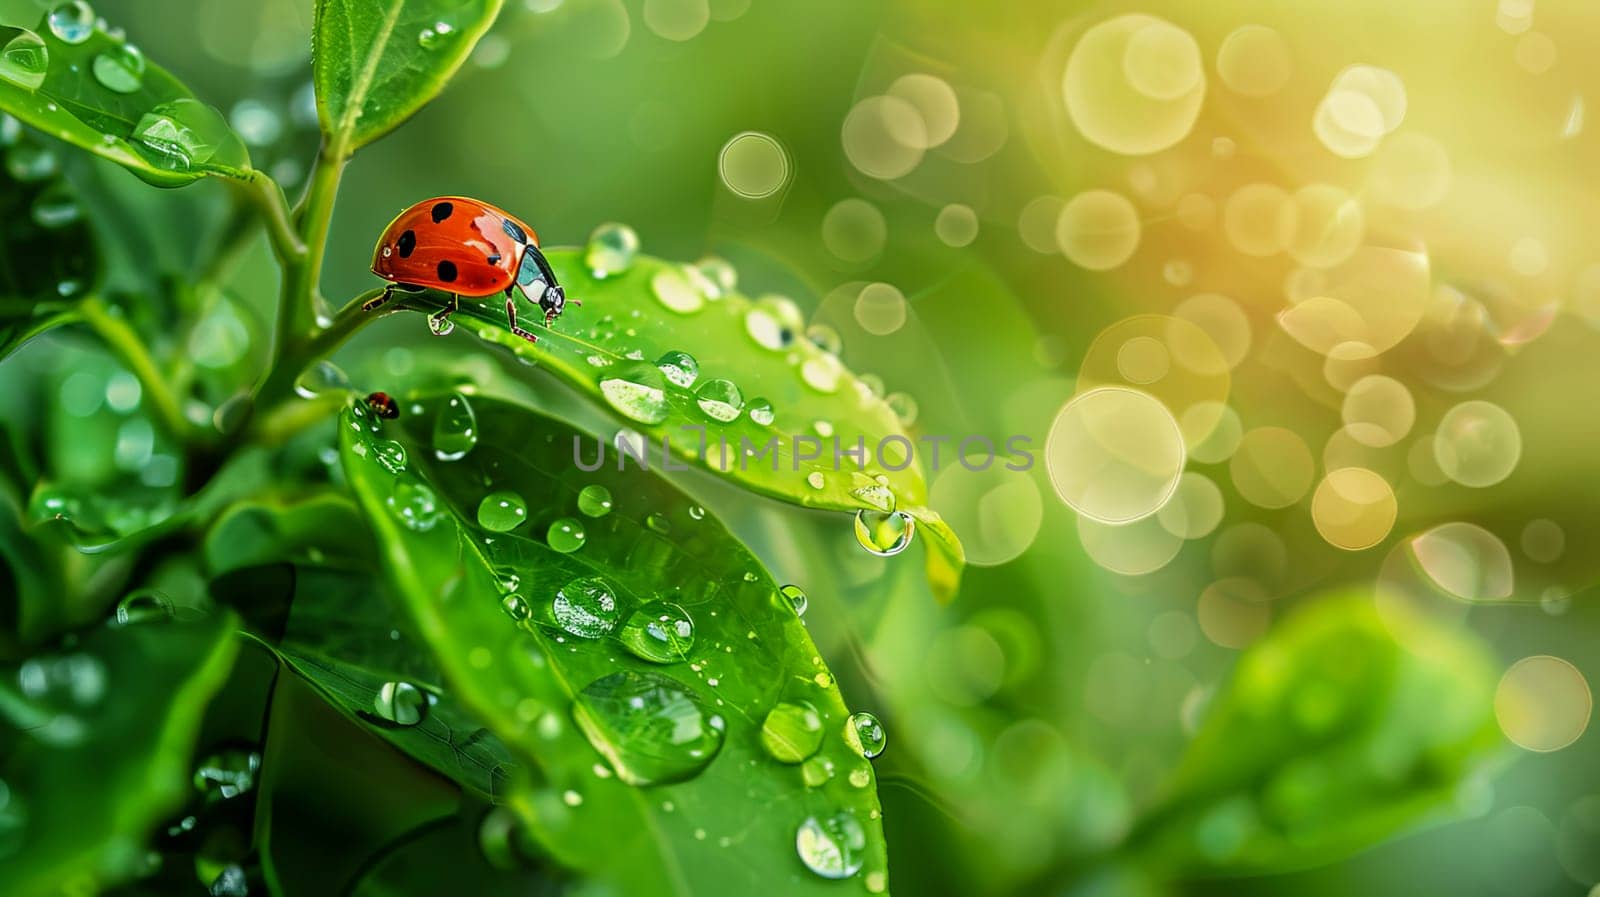 Ladybug on green leaves with morning dew, nature background with water drops and copy space. AI generated.